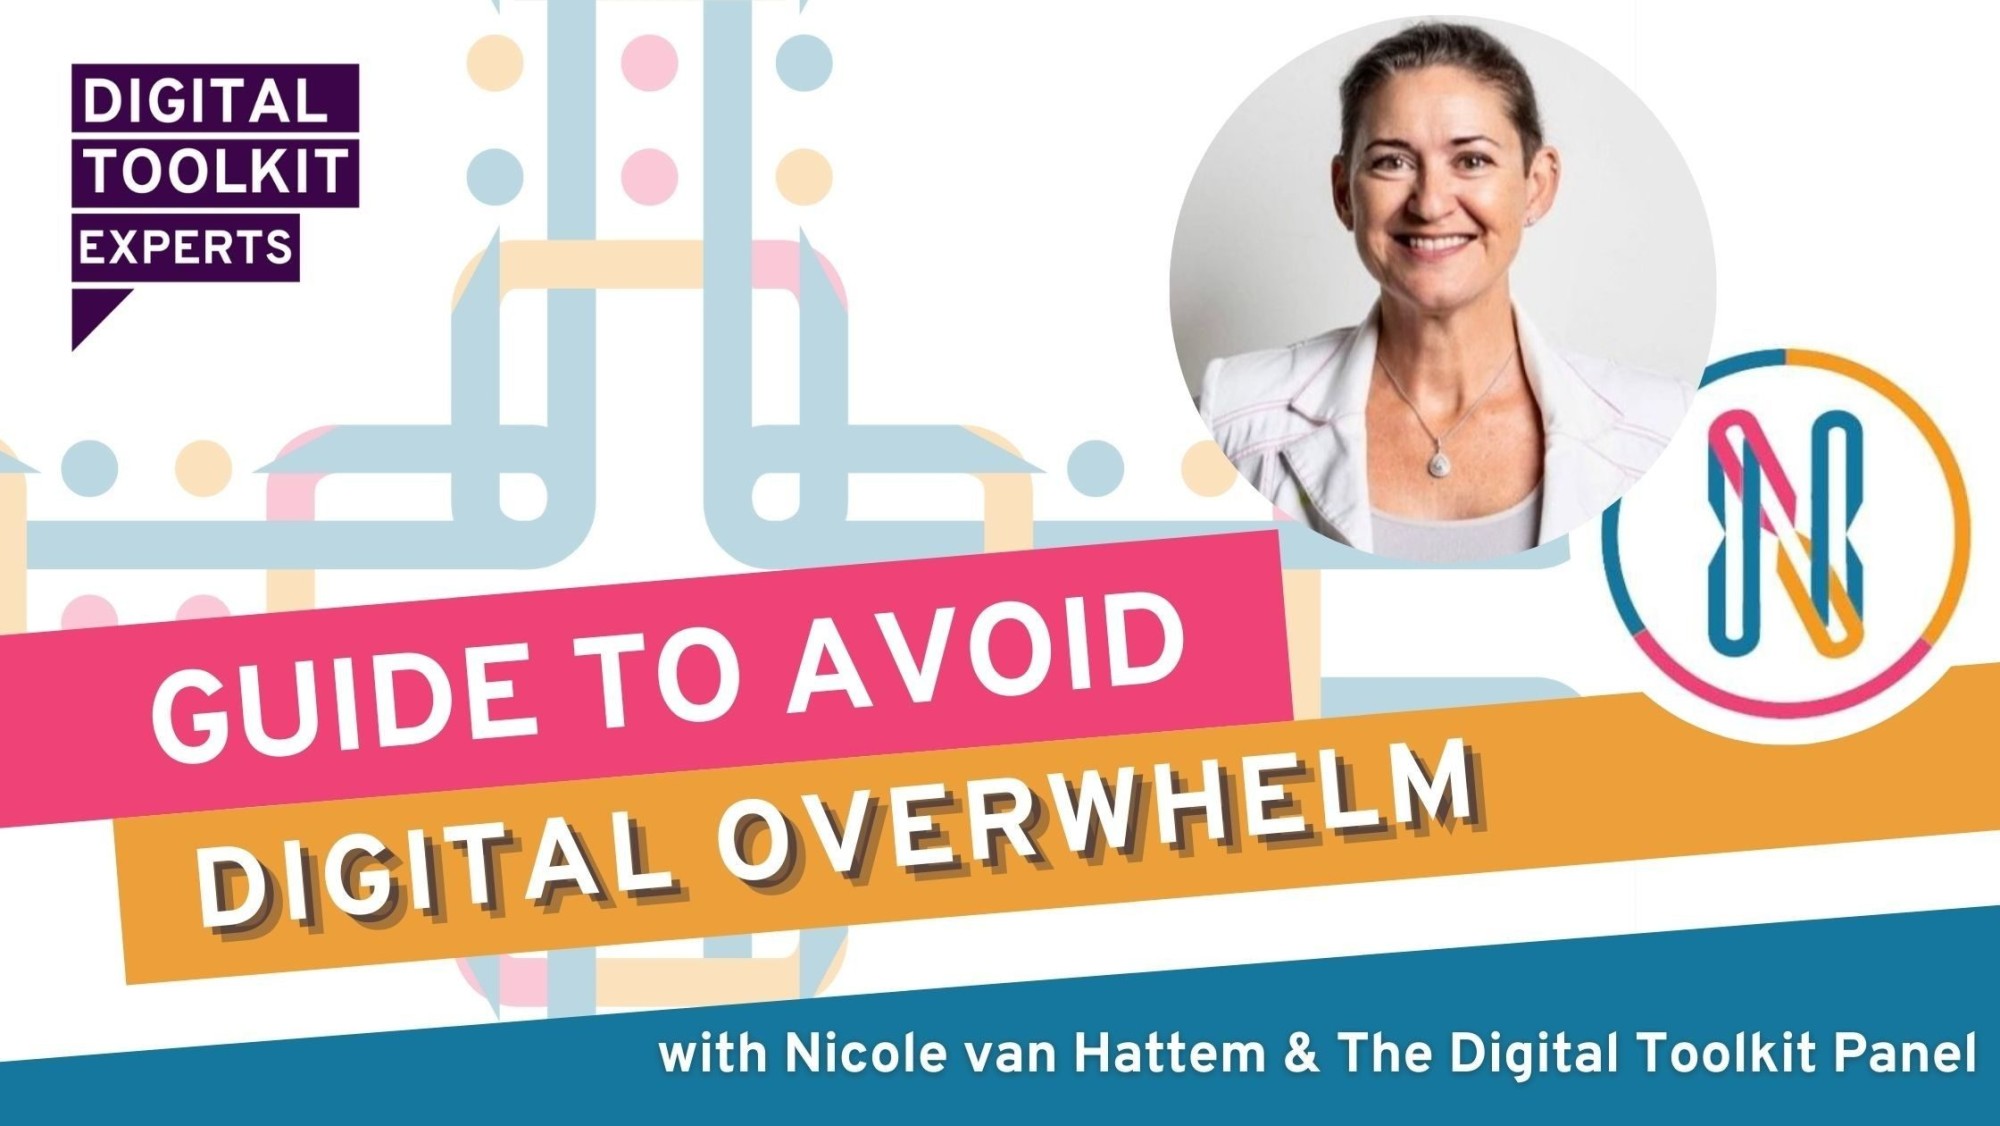 Guide to Avoid Digital Overwhelm